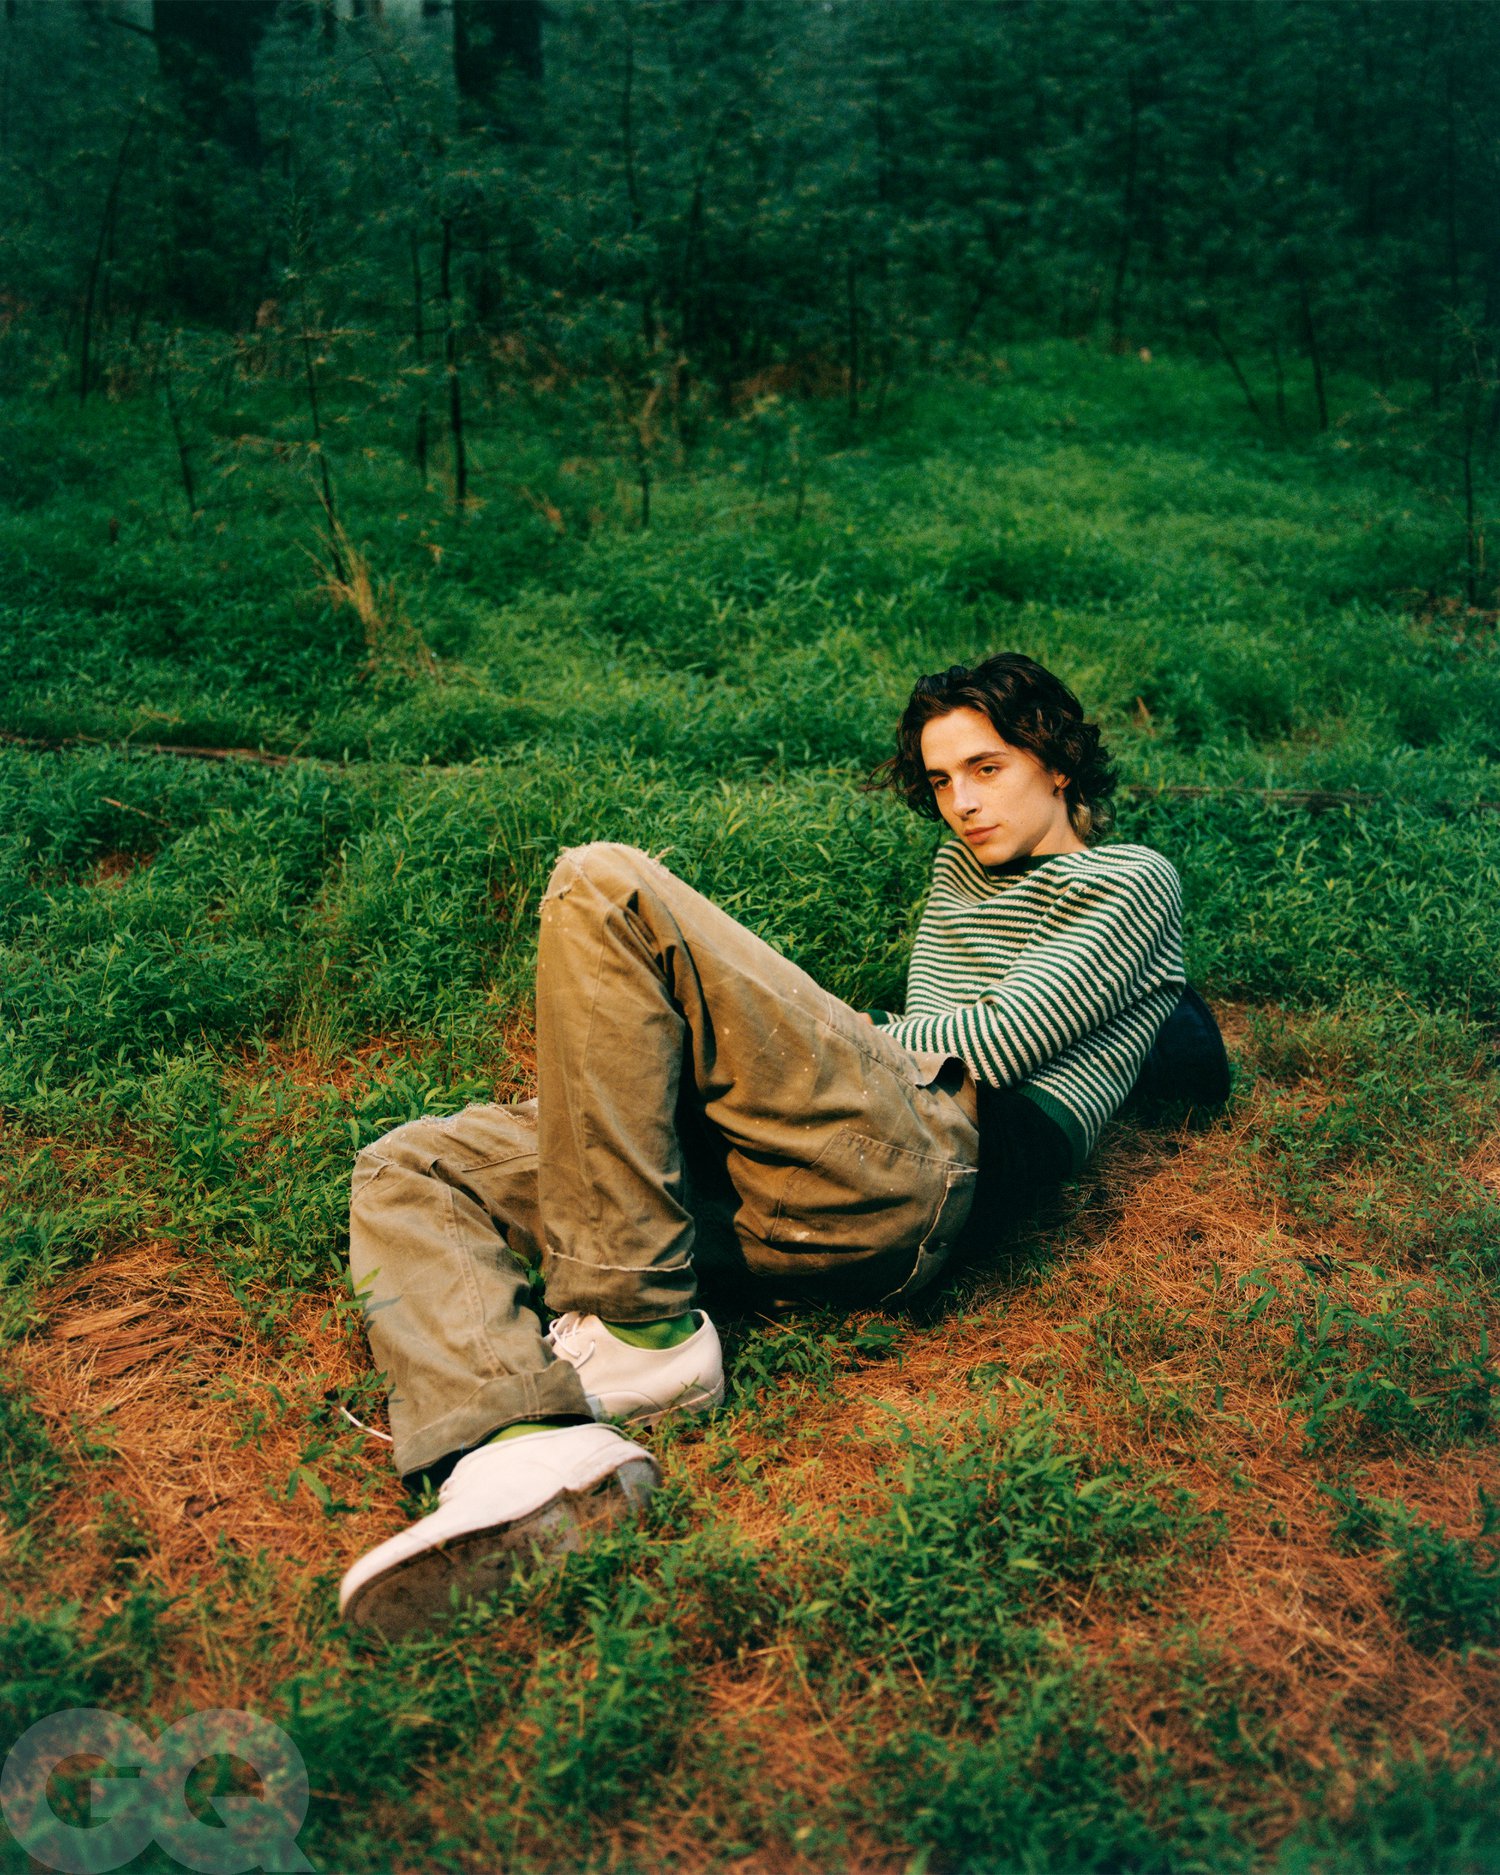 #TimotheeChalamet features on the November 2020 cover story of #GQ wearing our iconic #PoloRalphLauren chino pants. Photographer: Renell Medrano